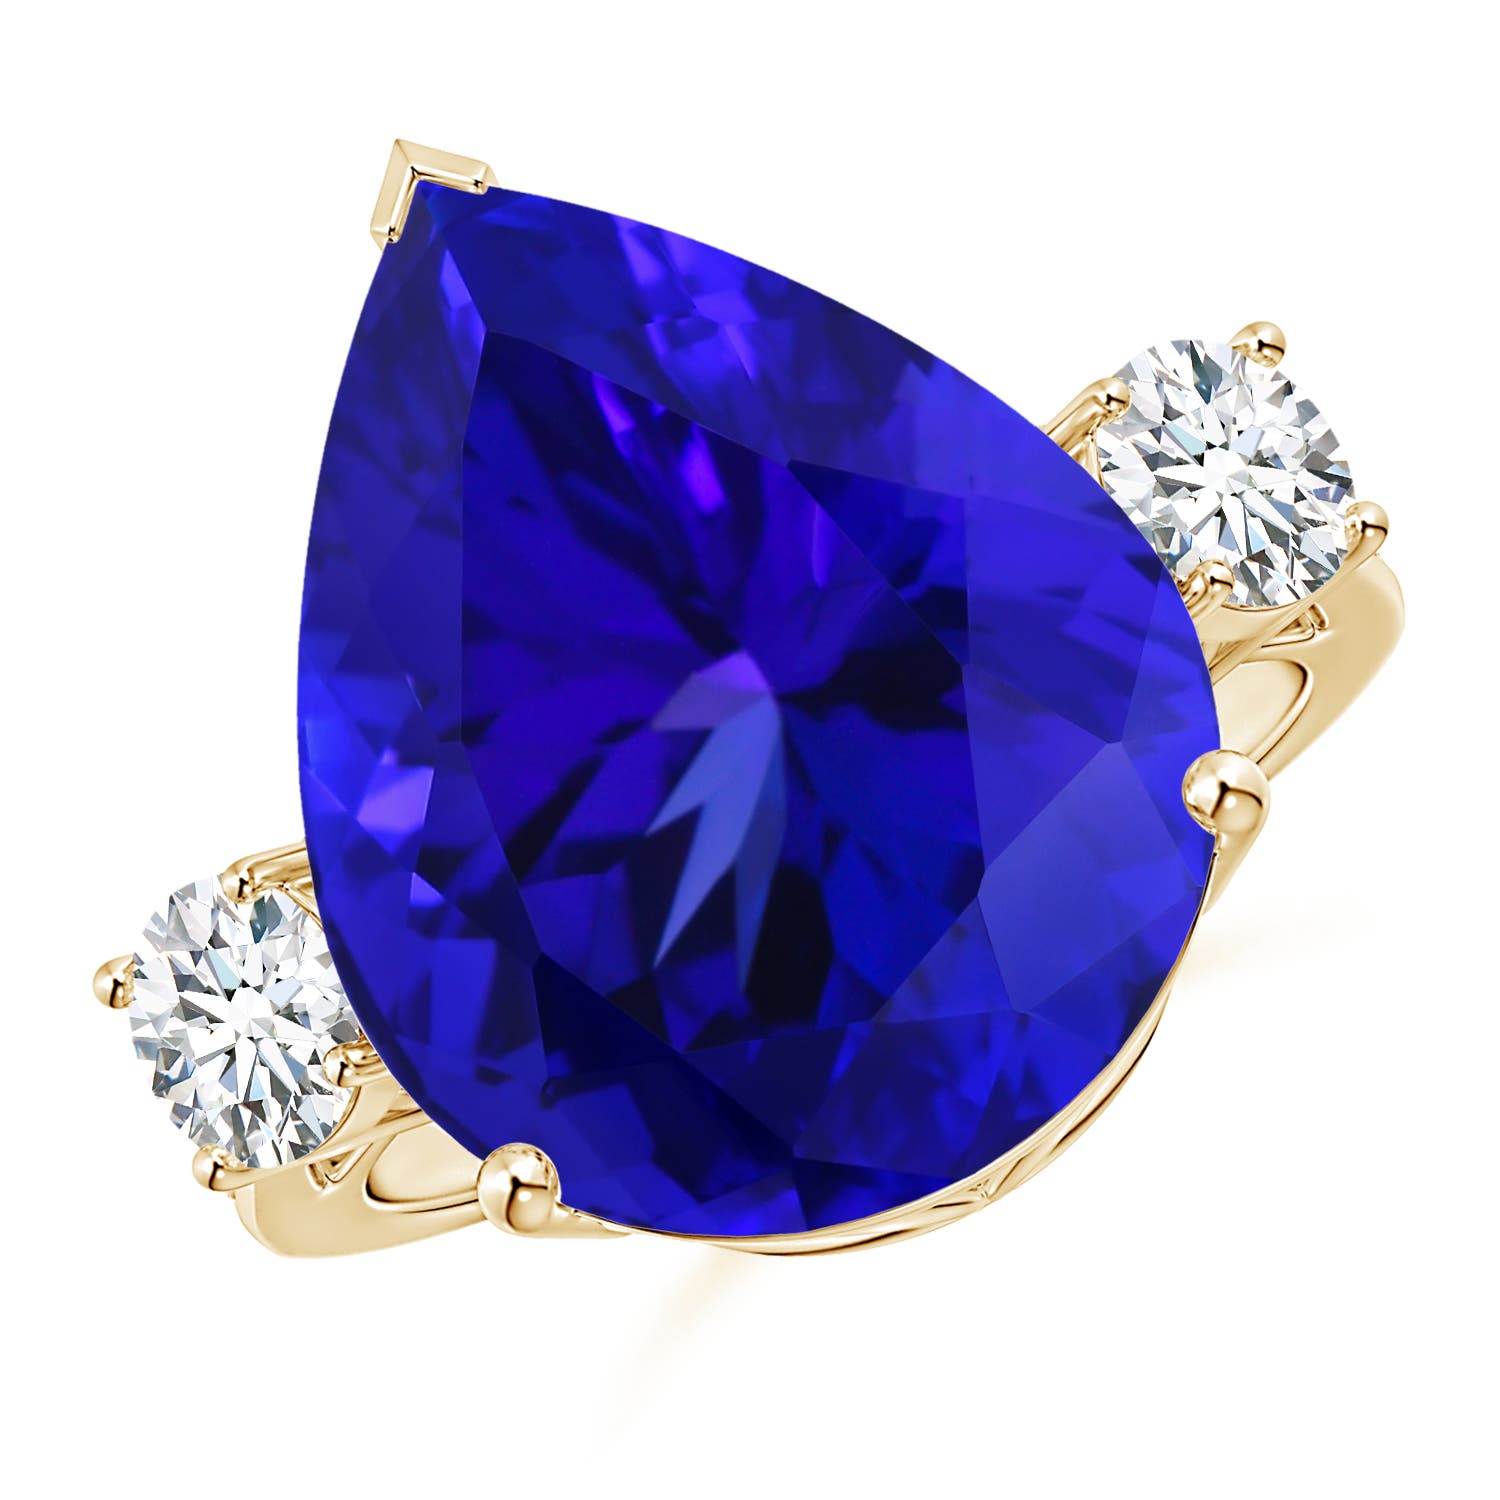 For Sale:  Angara Gia Certified Natural Tanzanite Ring in Yellow Gold with Diamonds